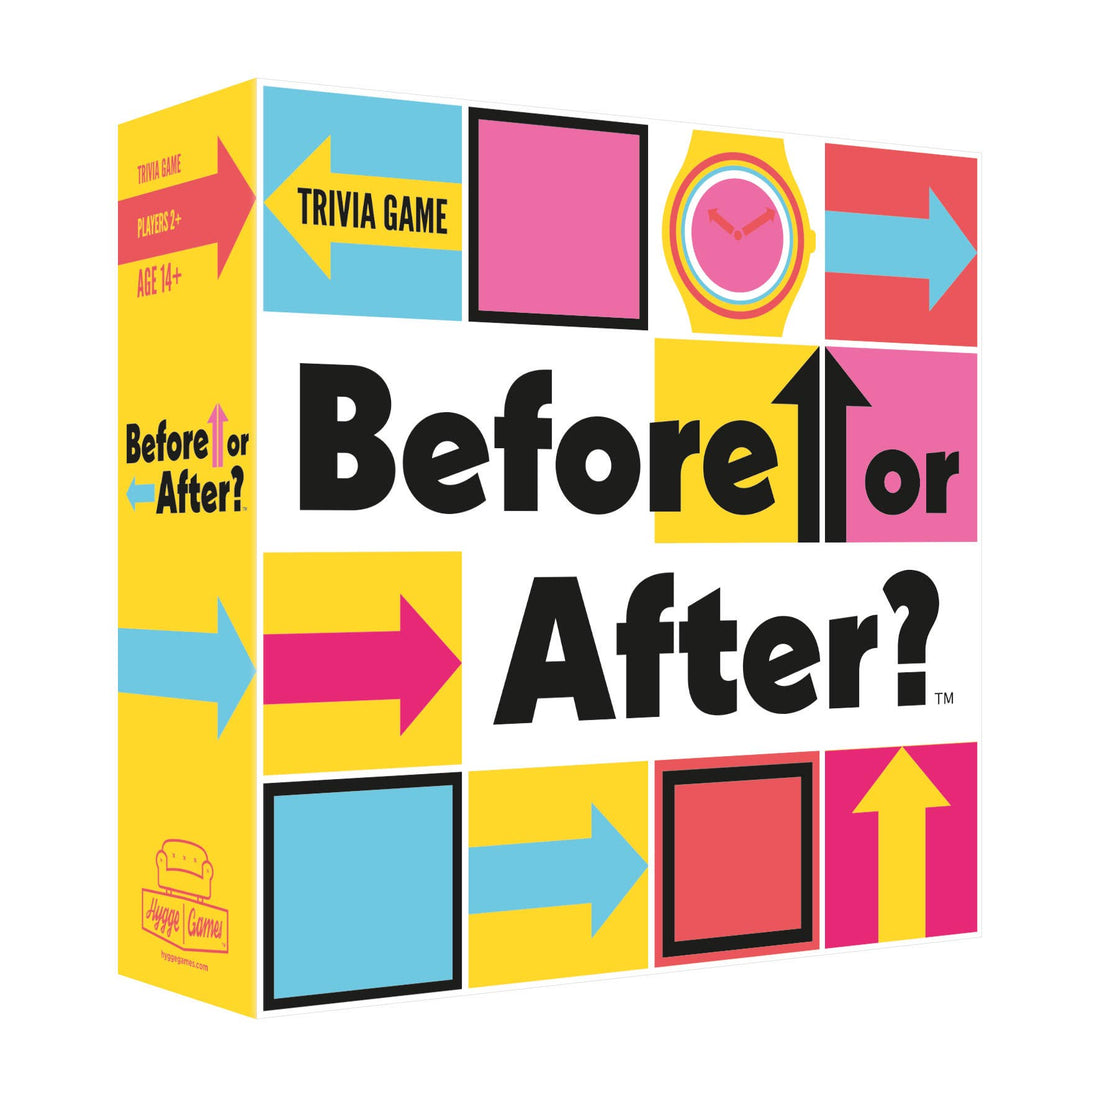 Before or After Card Game